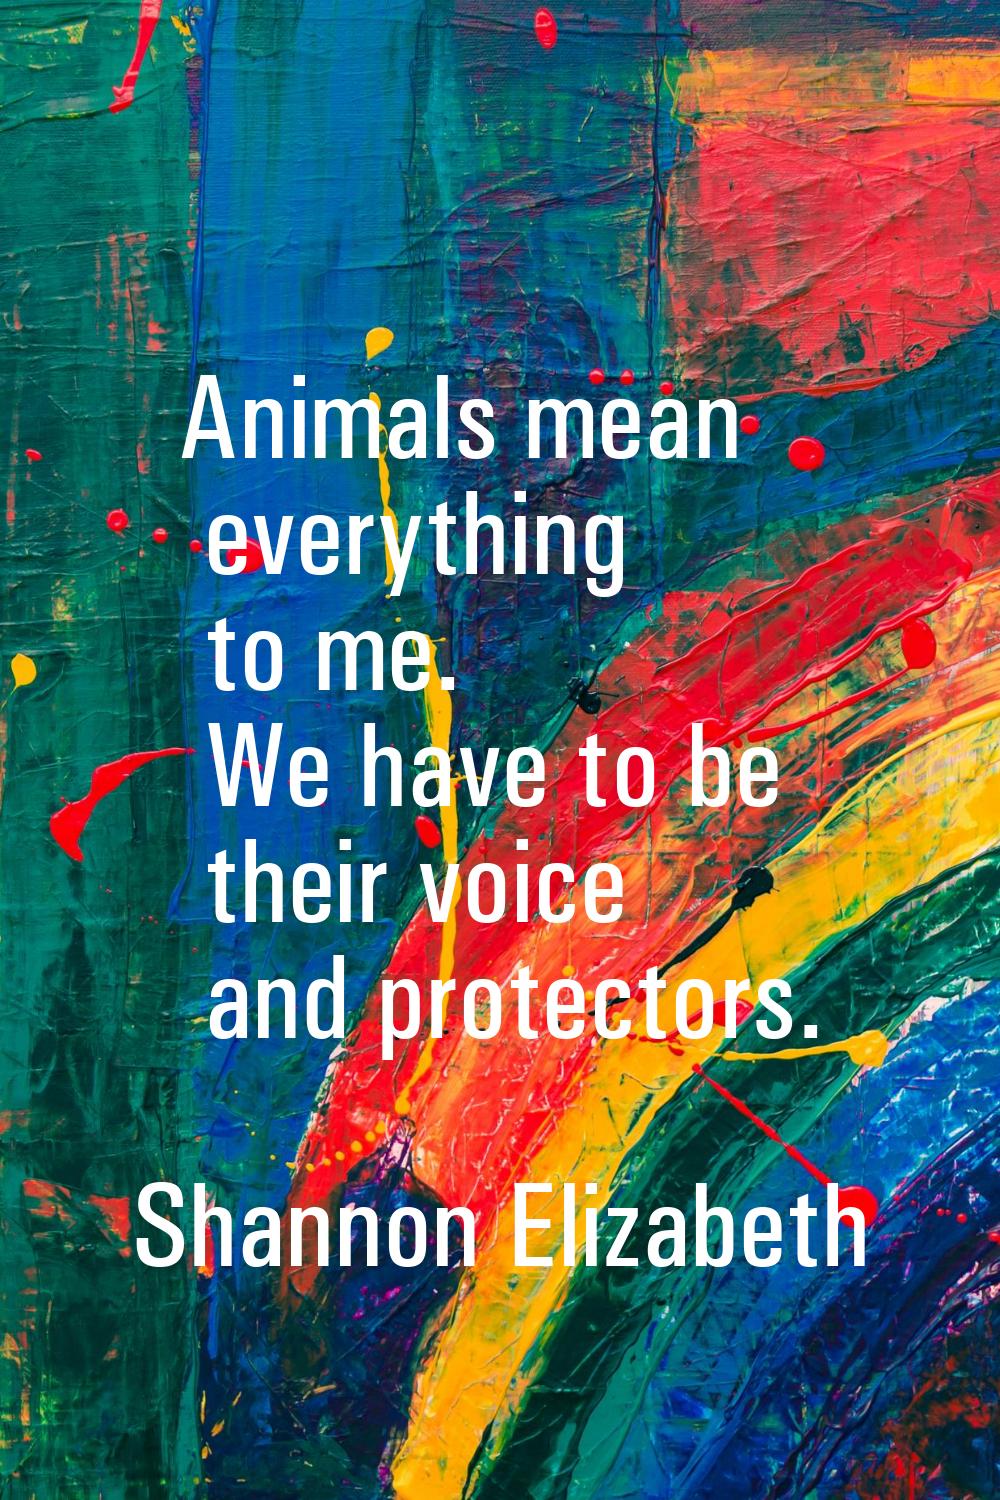 Animals mean everything to me. We have to be their voice and protectors.